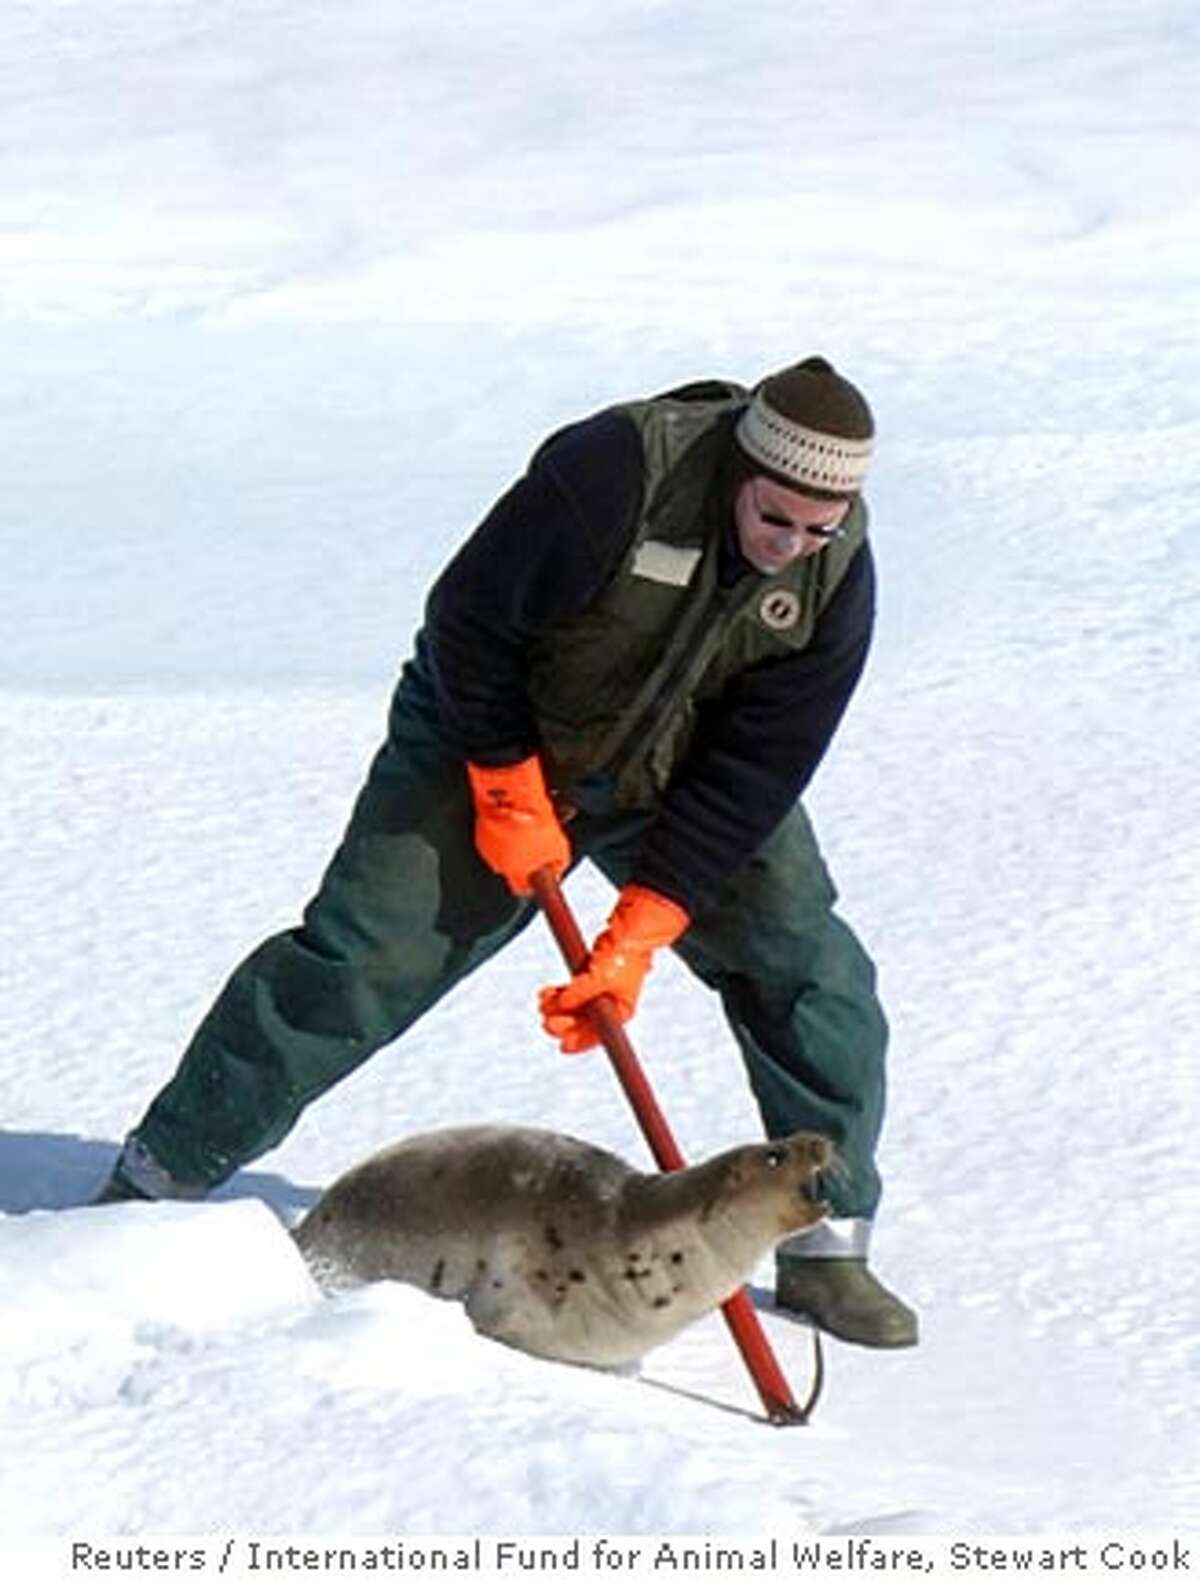 ATTENTION EDITORS - ADDING RESTRICTIONS A hunter clubs a harp seal on the opening day of s 2008 commercial seal hunt in the Gulf of St. Lawrence March 28, 2008. REUTERS/International Fund for Animal Welfare/Stewart Cook/Handout (CANADA) MANDATORY CREDIT. NO SALES. NO ARCHIVES. FOR EDITORIAL USE ONLY. NOT FOR SALE FOR MARKETING OR ADVERTISING CAMPAIGNS.